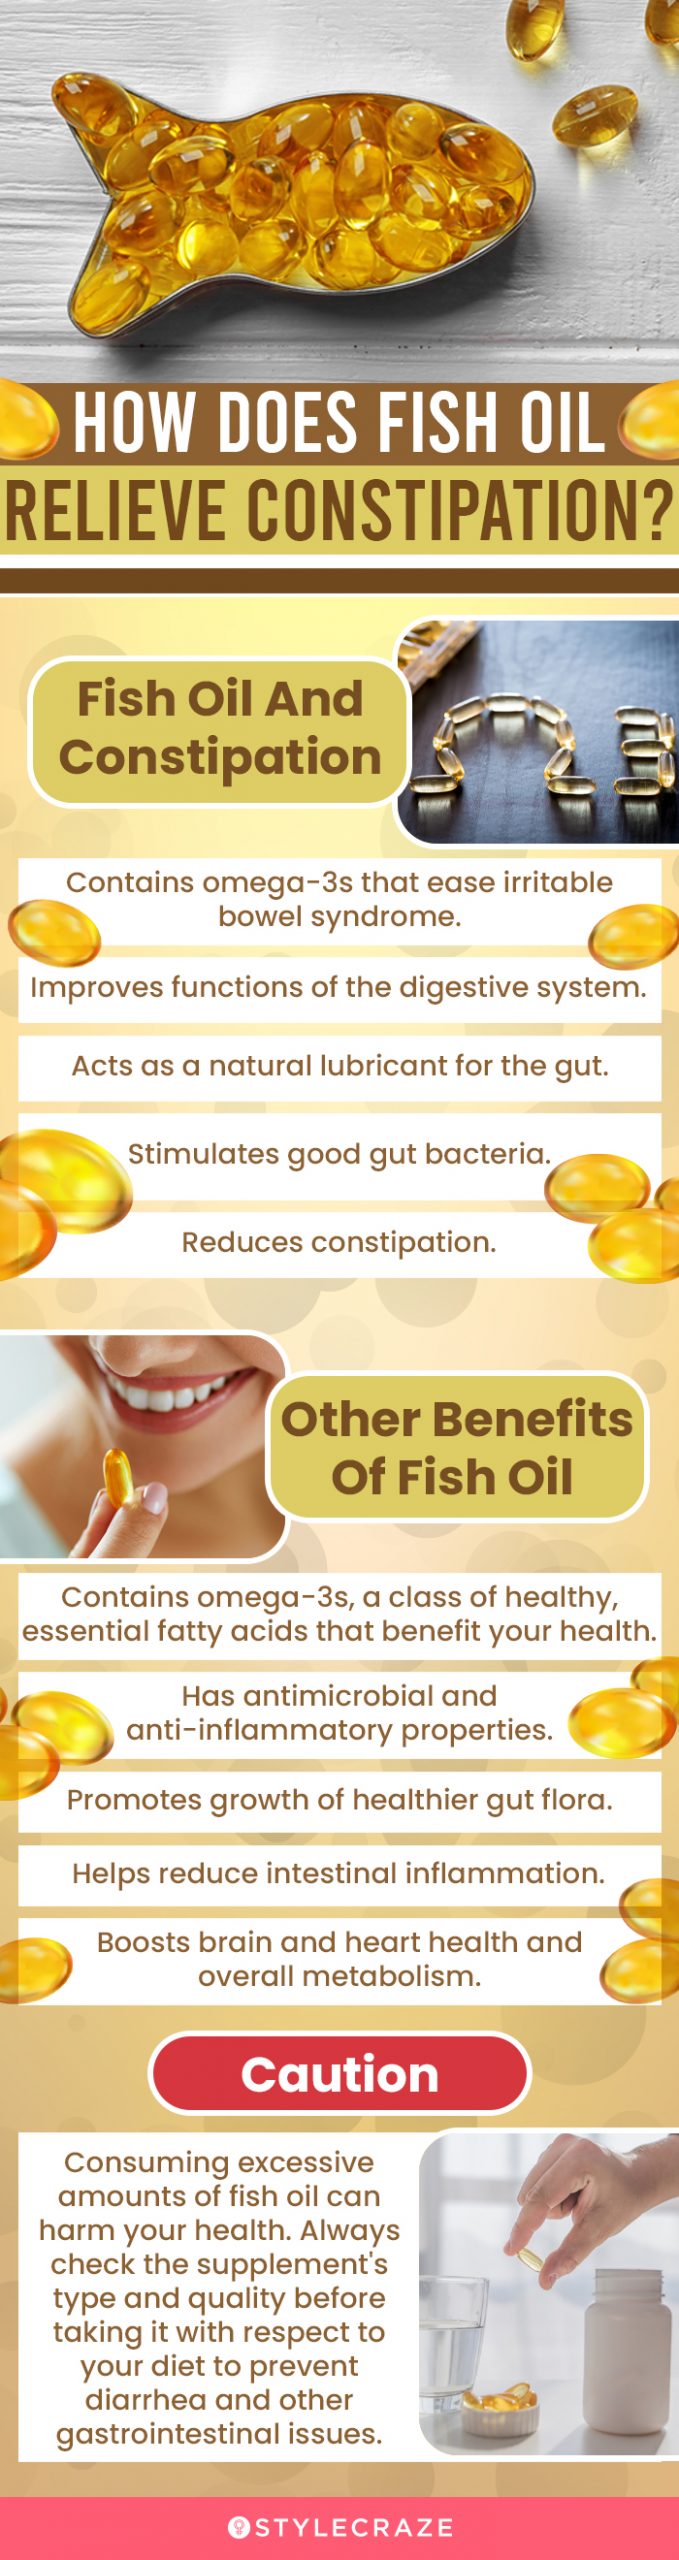 does fish oil aggravate or relieve constipation (infographic)